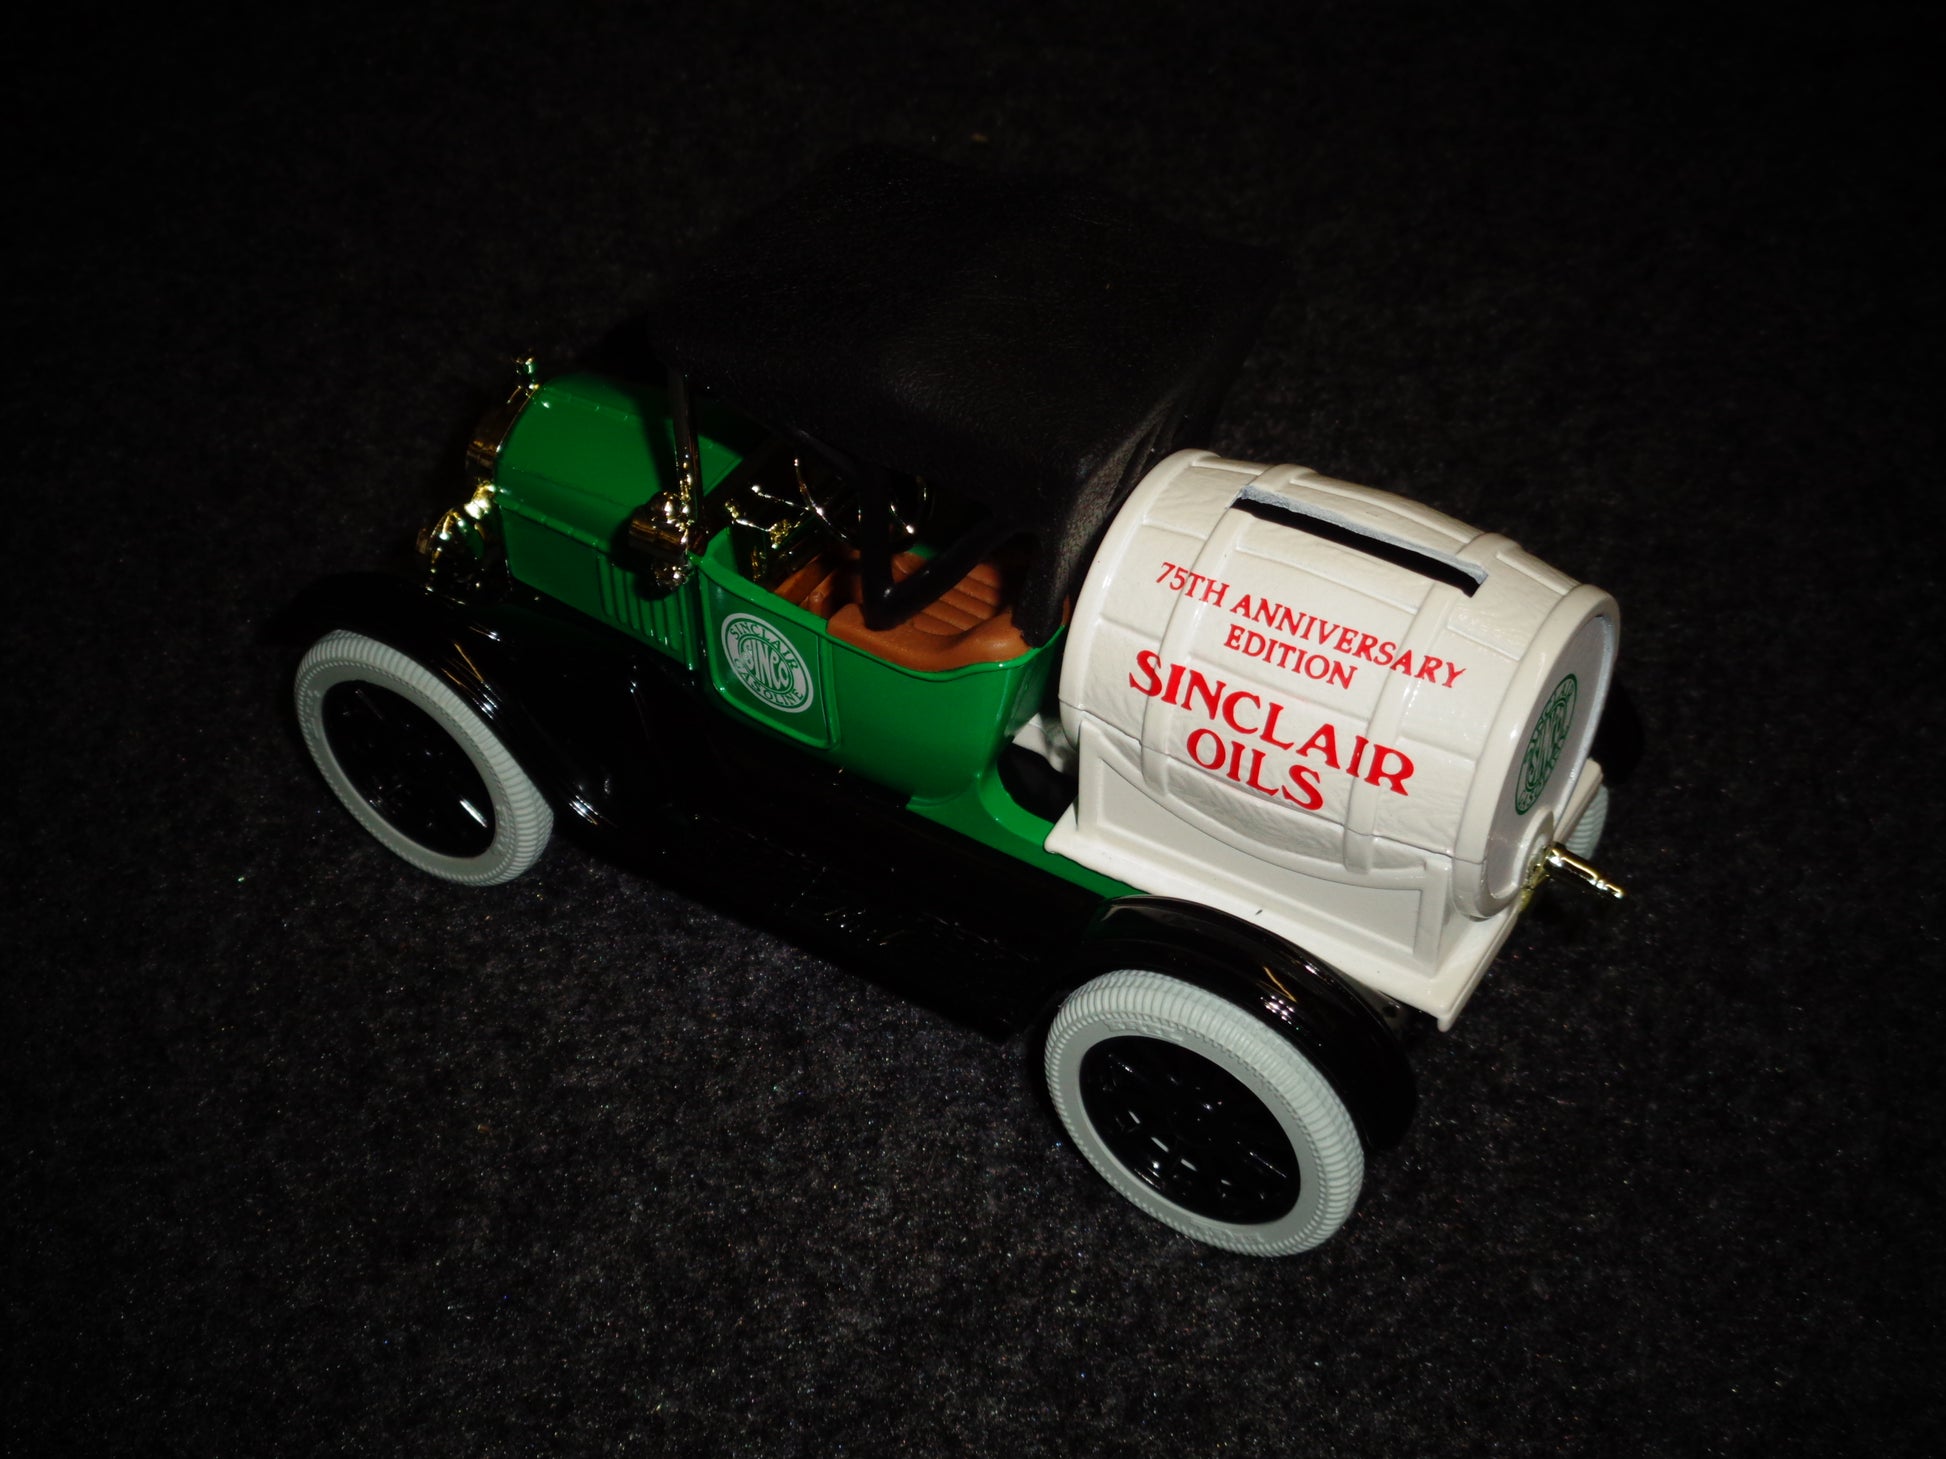 Sinclair 1918 Ford Runabout Barrel Truck